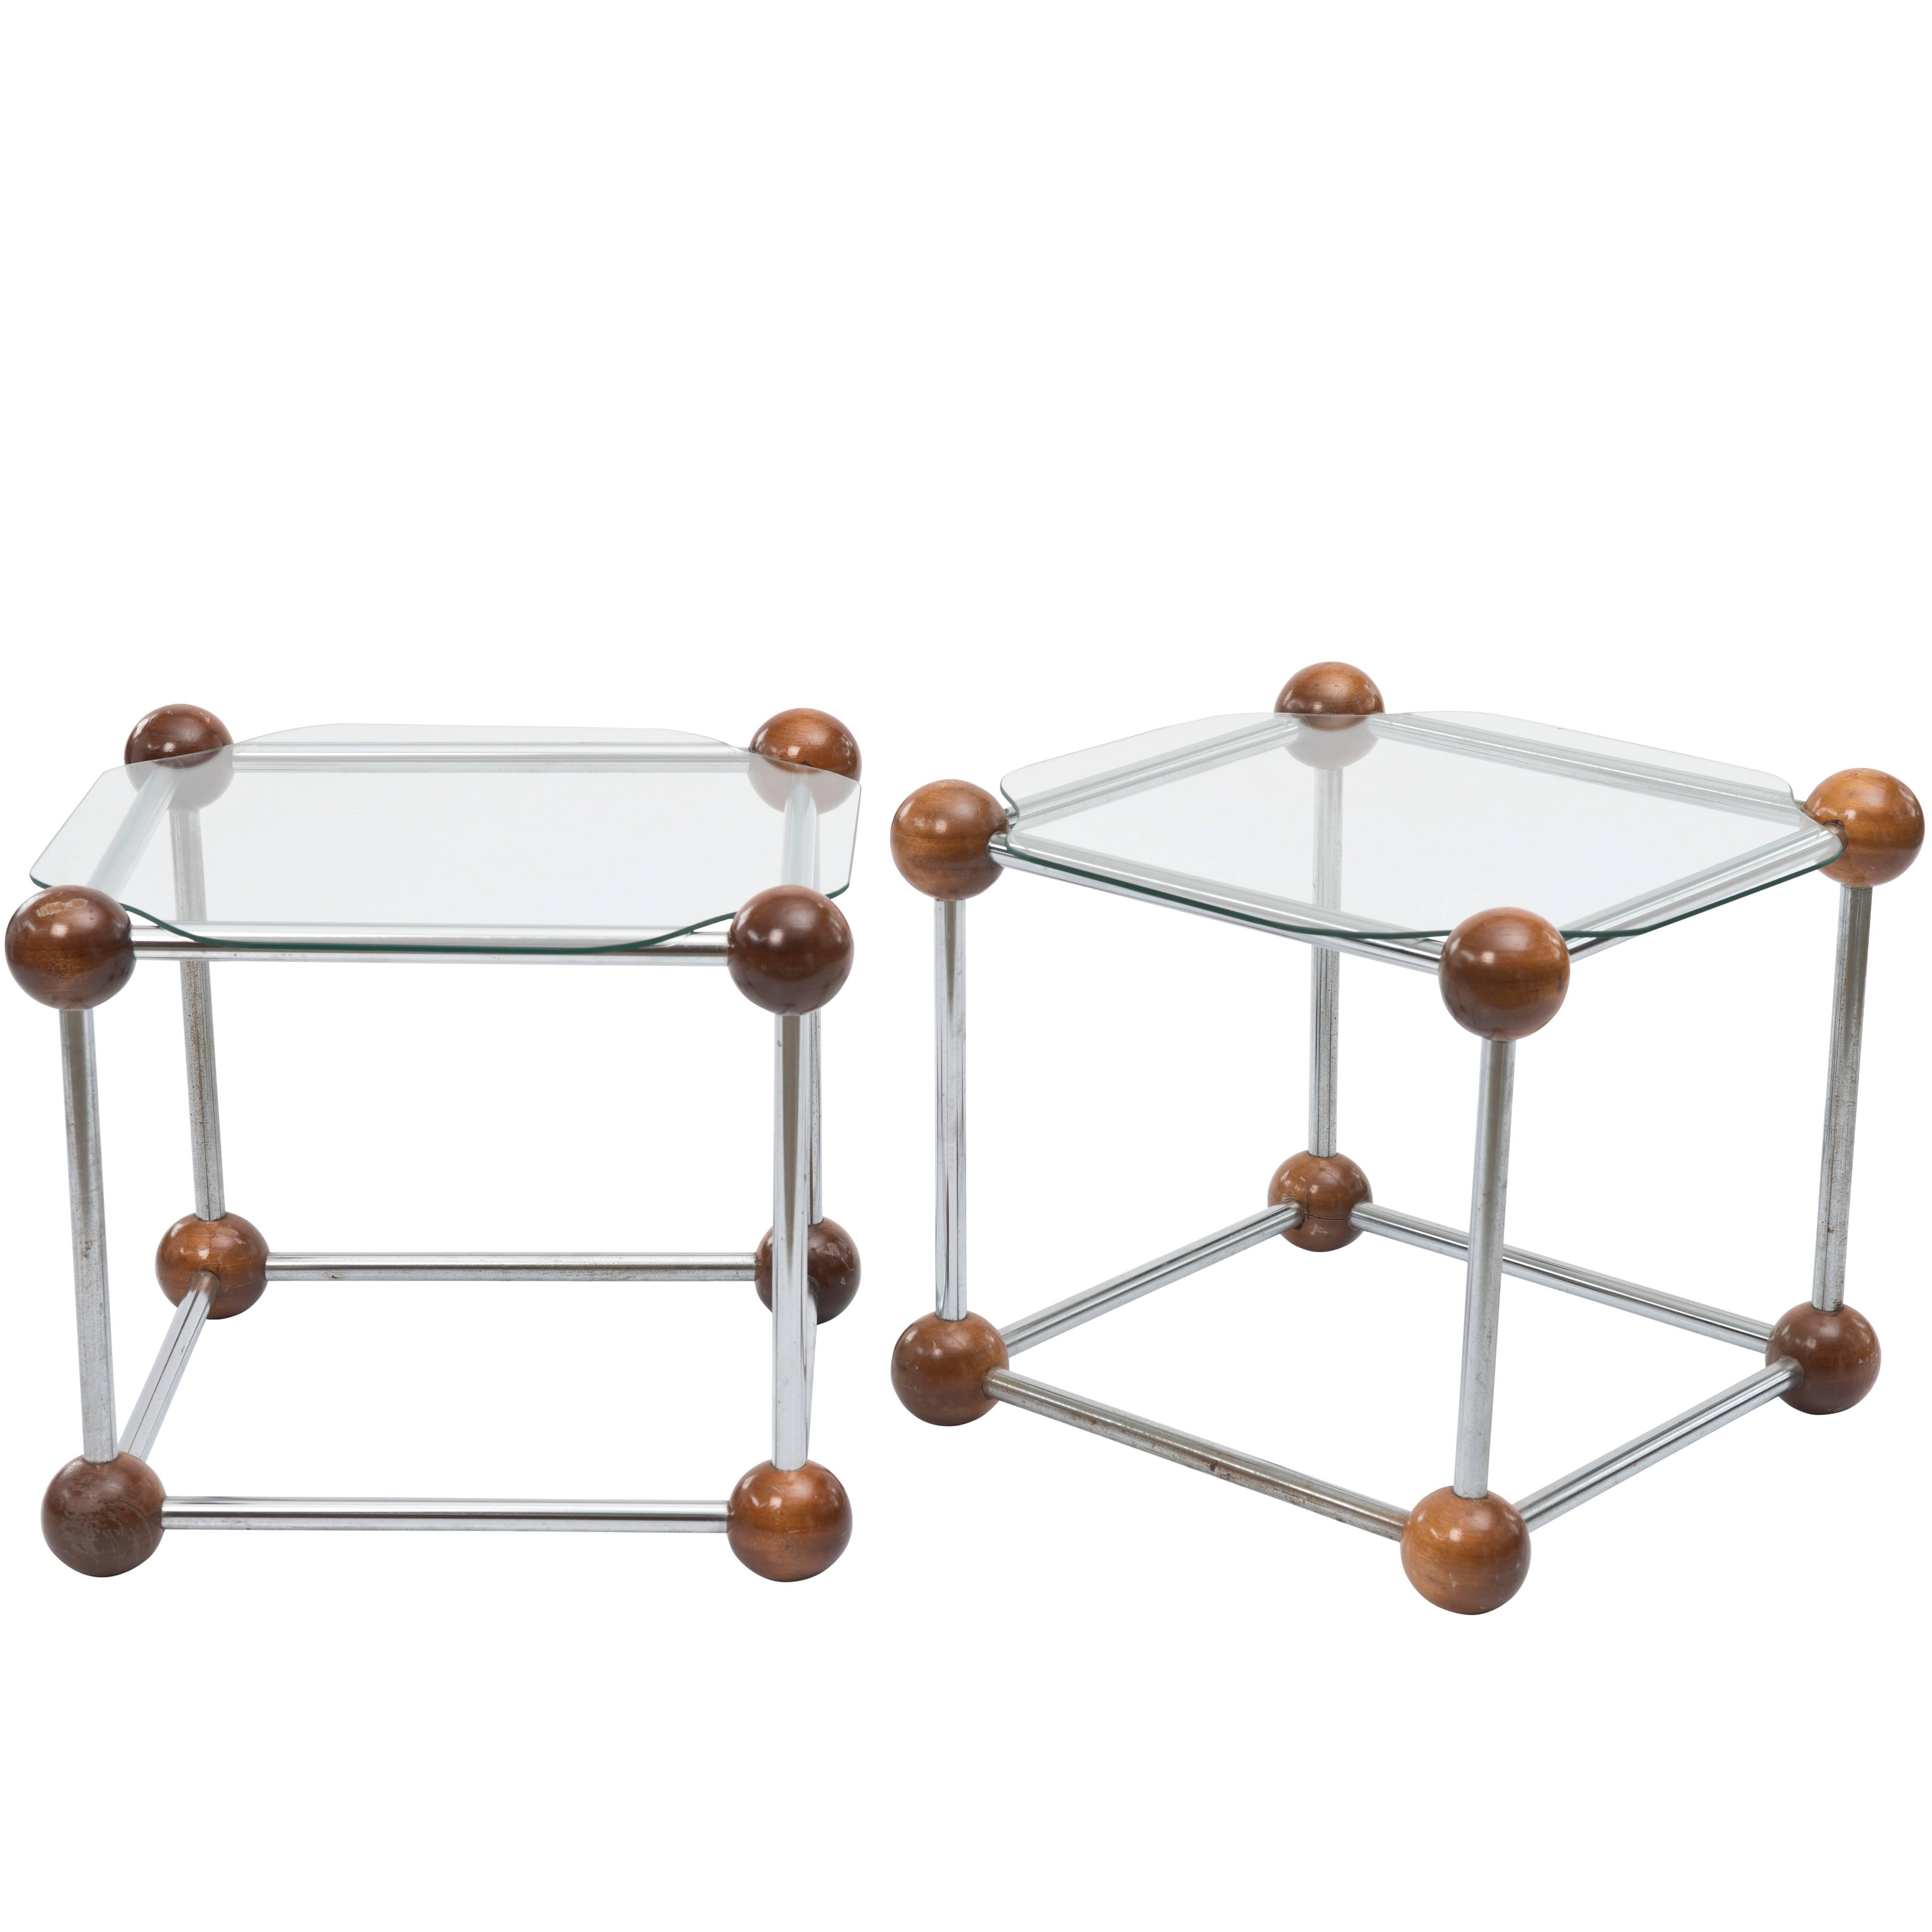 Atomic Age Side Tables For Sale